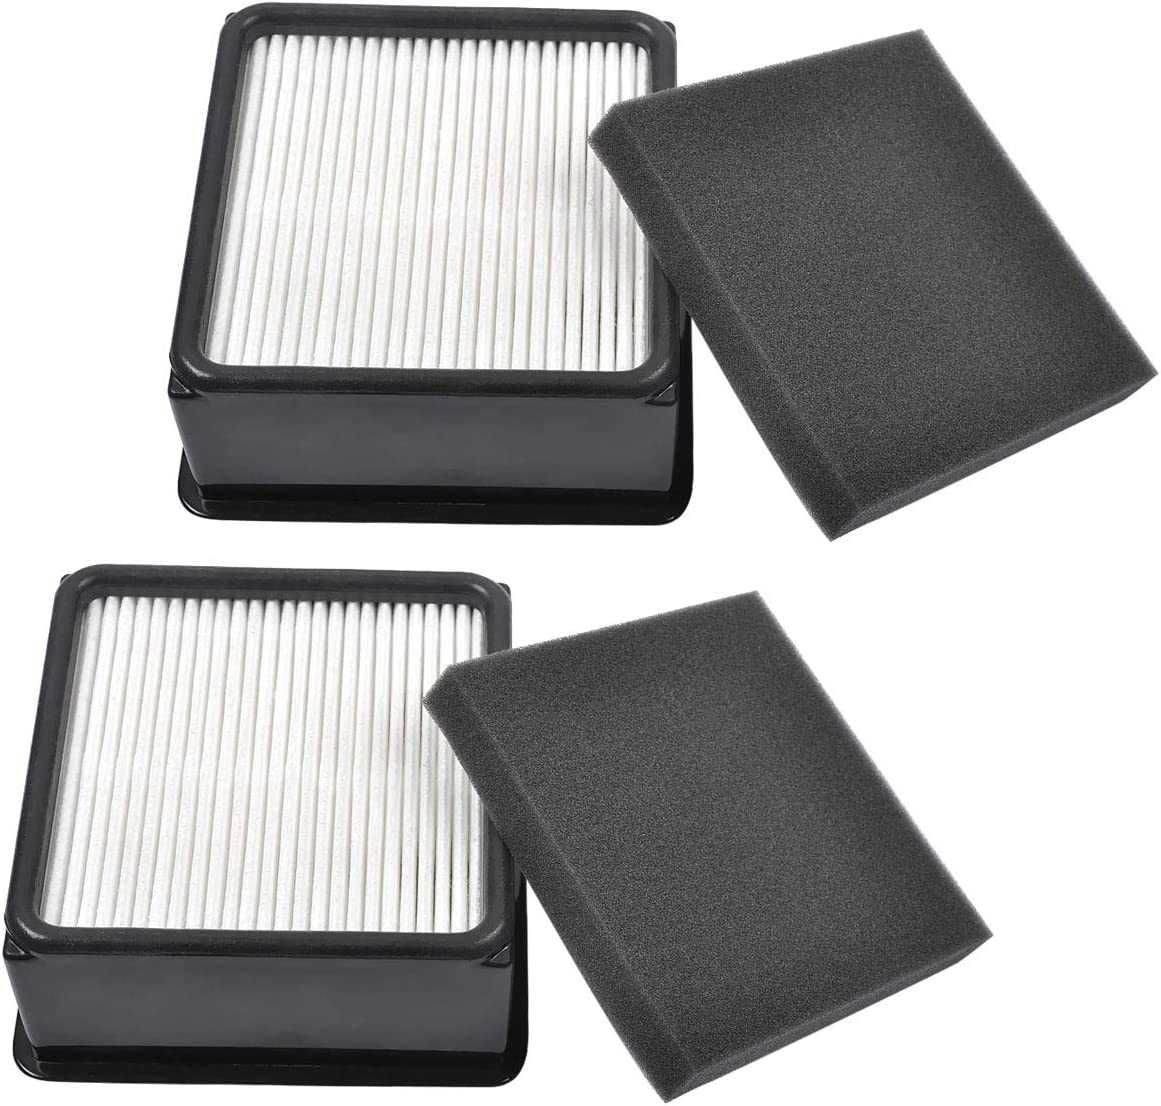 KEEPOW 1301F Vacuums Filter for Dirt Devil Uprights